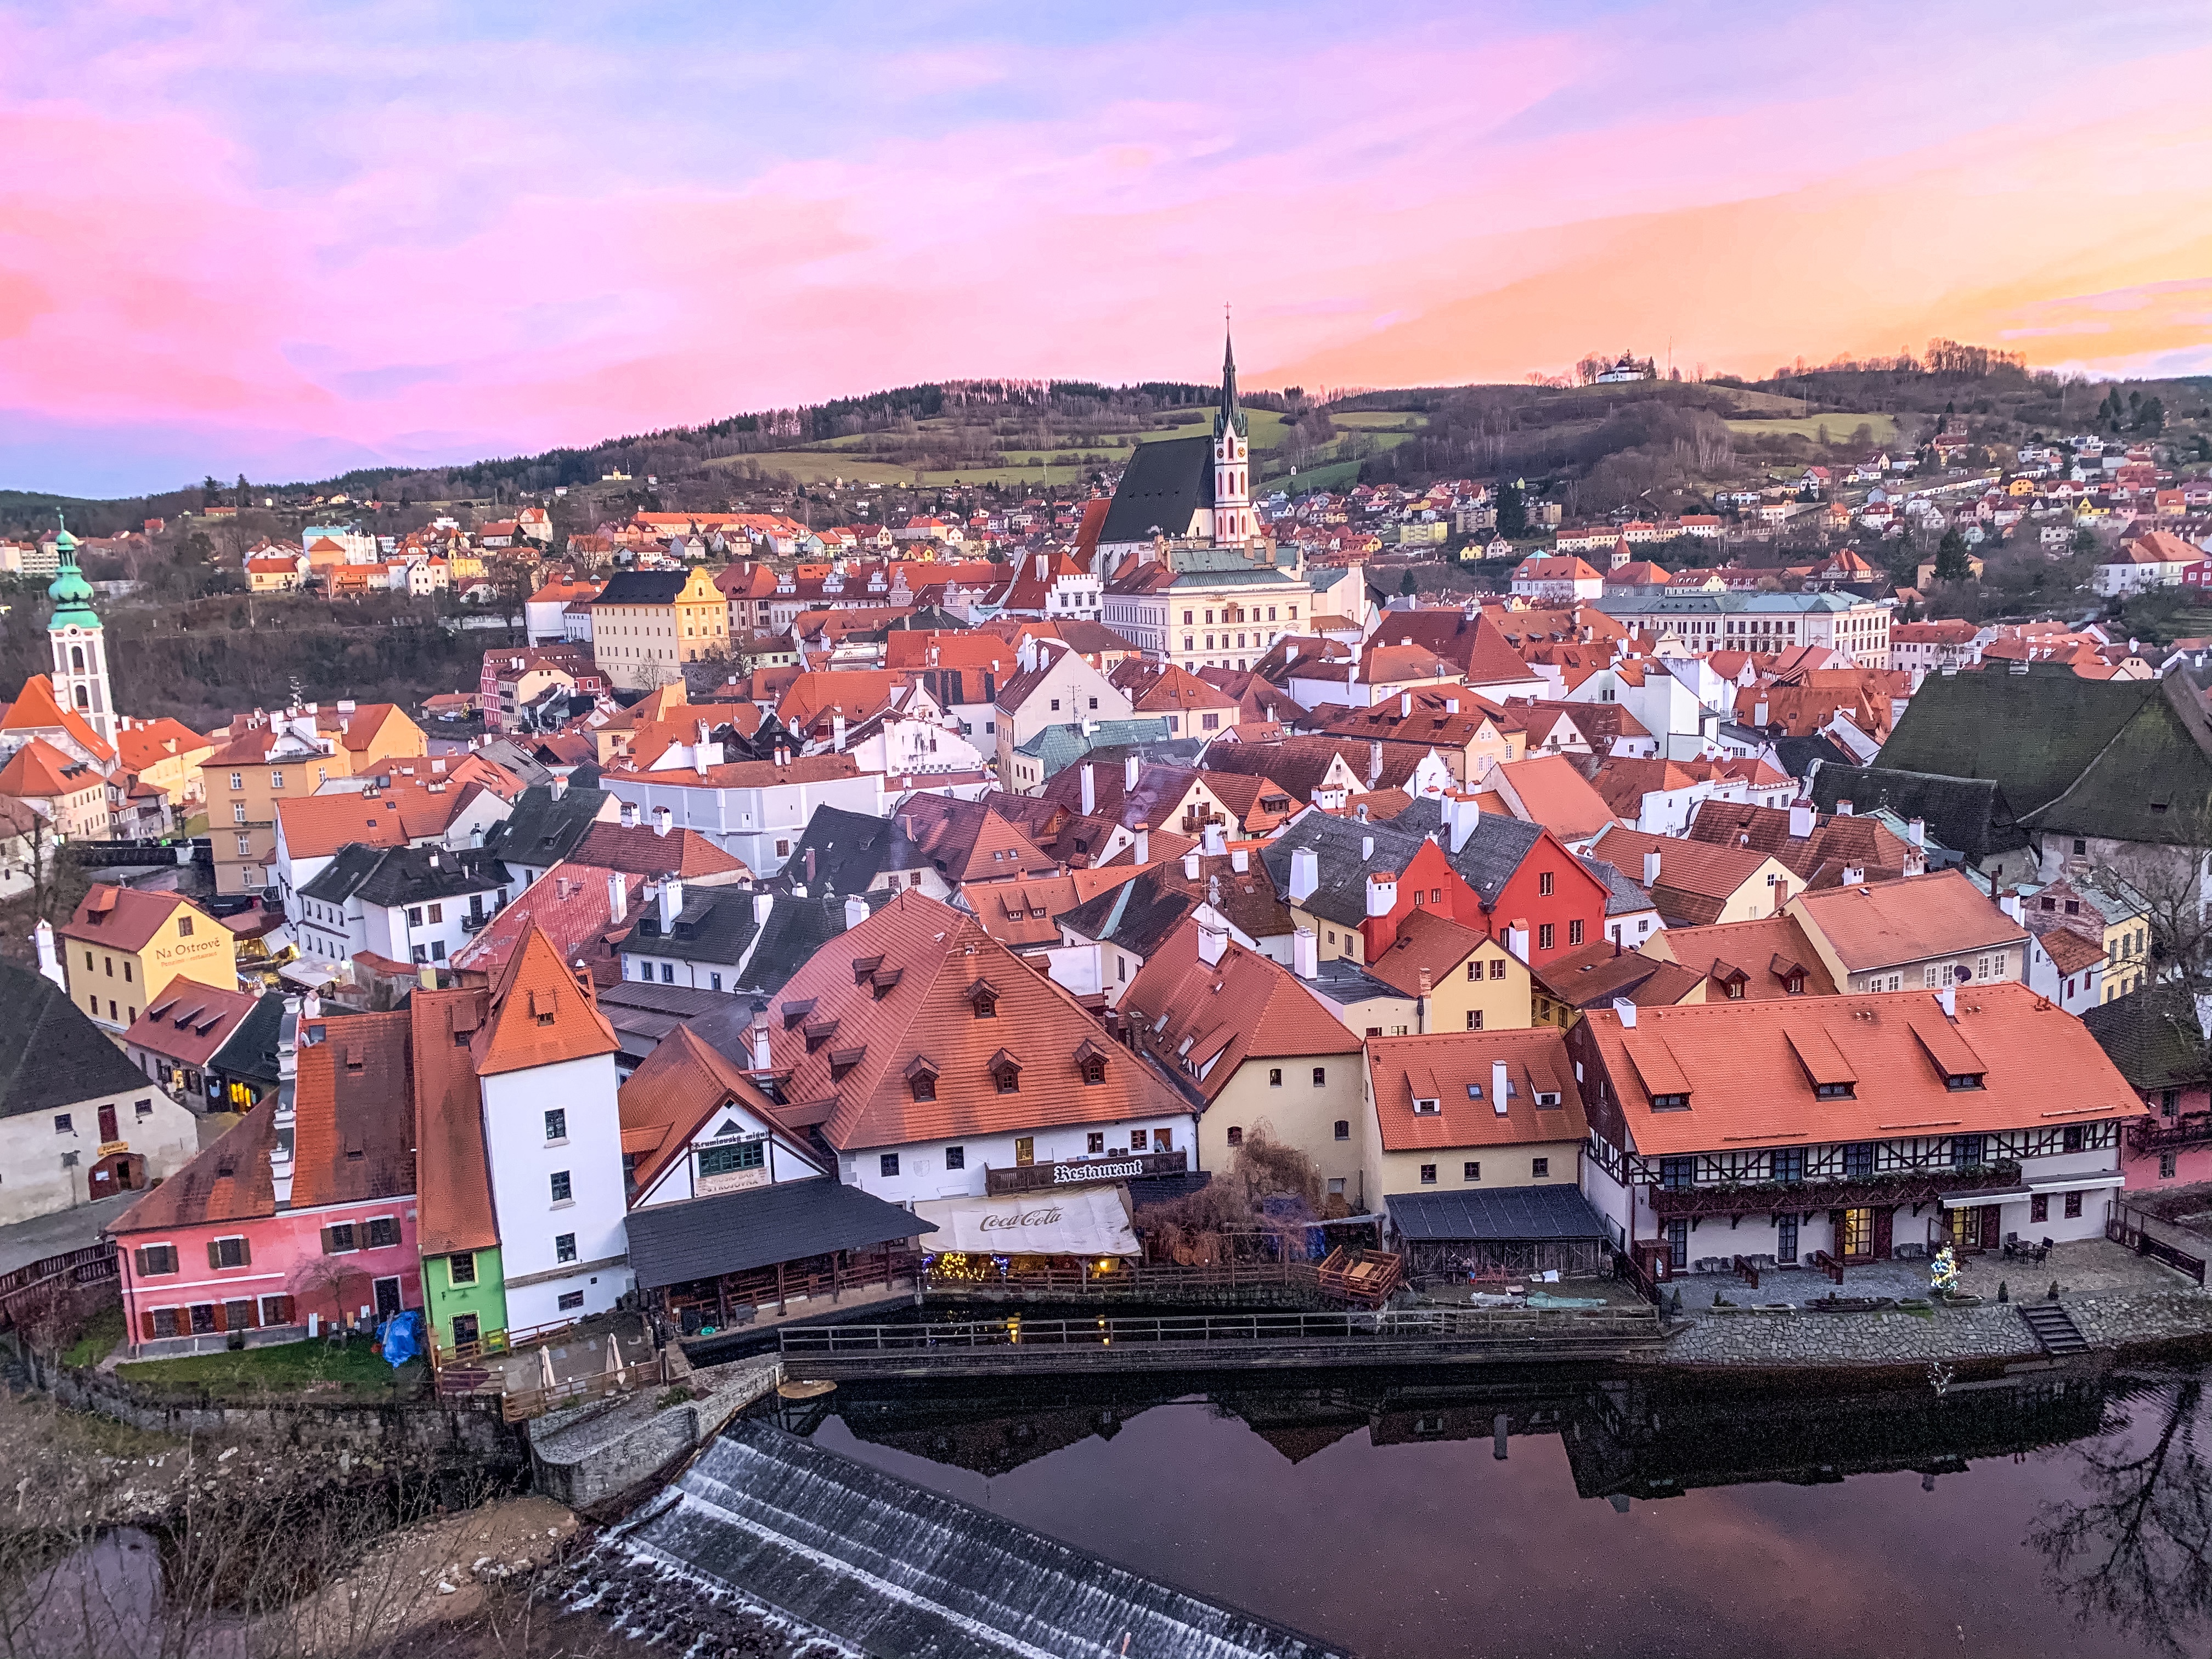 Sunset overlooking the small town of Cesky Krumlov